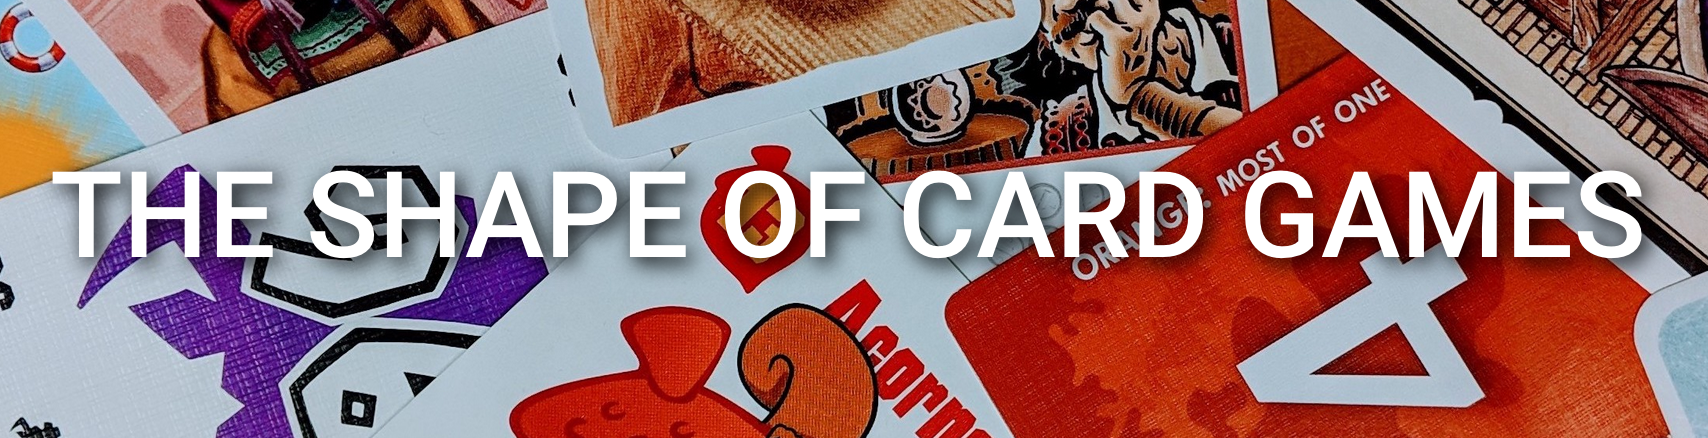 The Shape Of Card Games